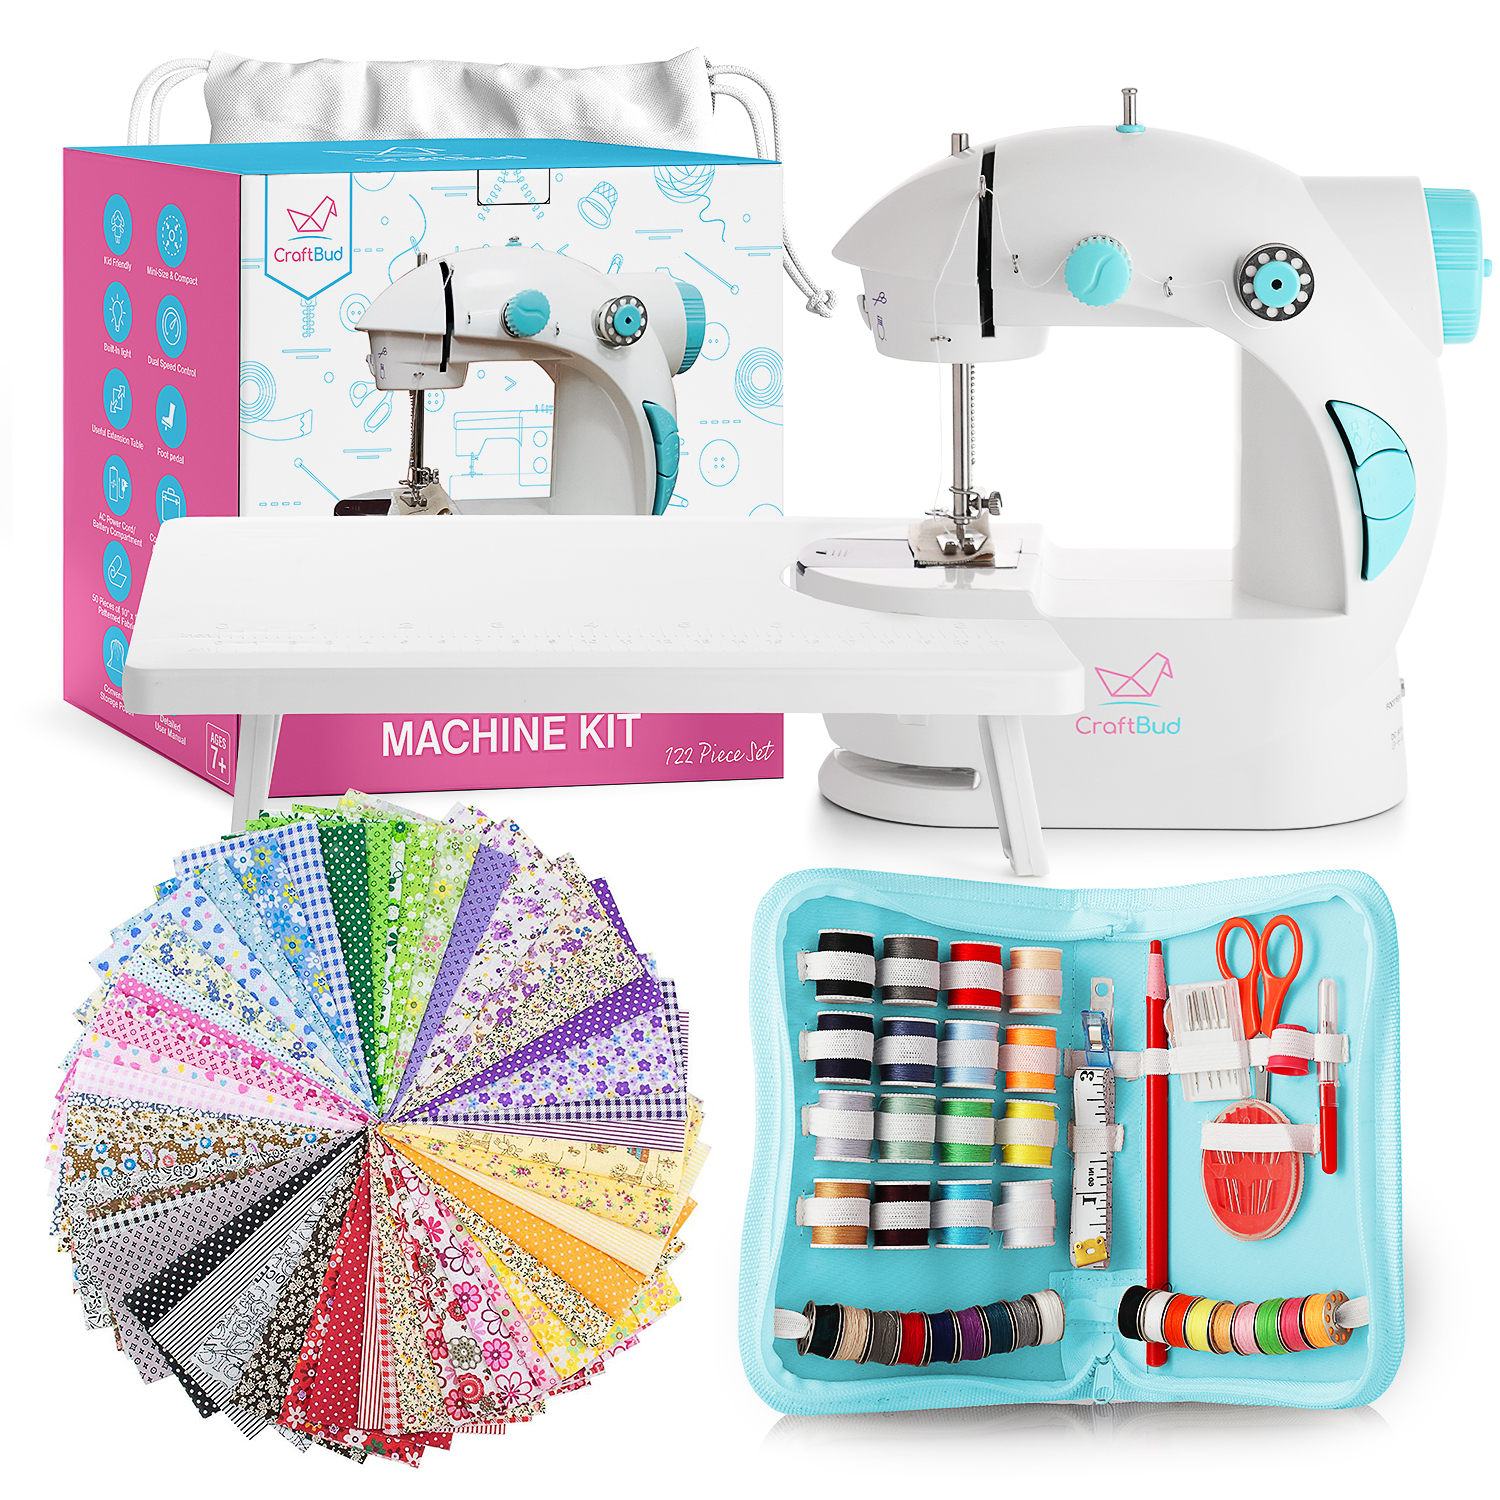 Sewing Machine, Portable Sewing Machine for Beginners with Light and  Extension Table, Easy to Use & Safe for Kids, Best Gifts Suitable for DIY  Home